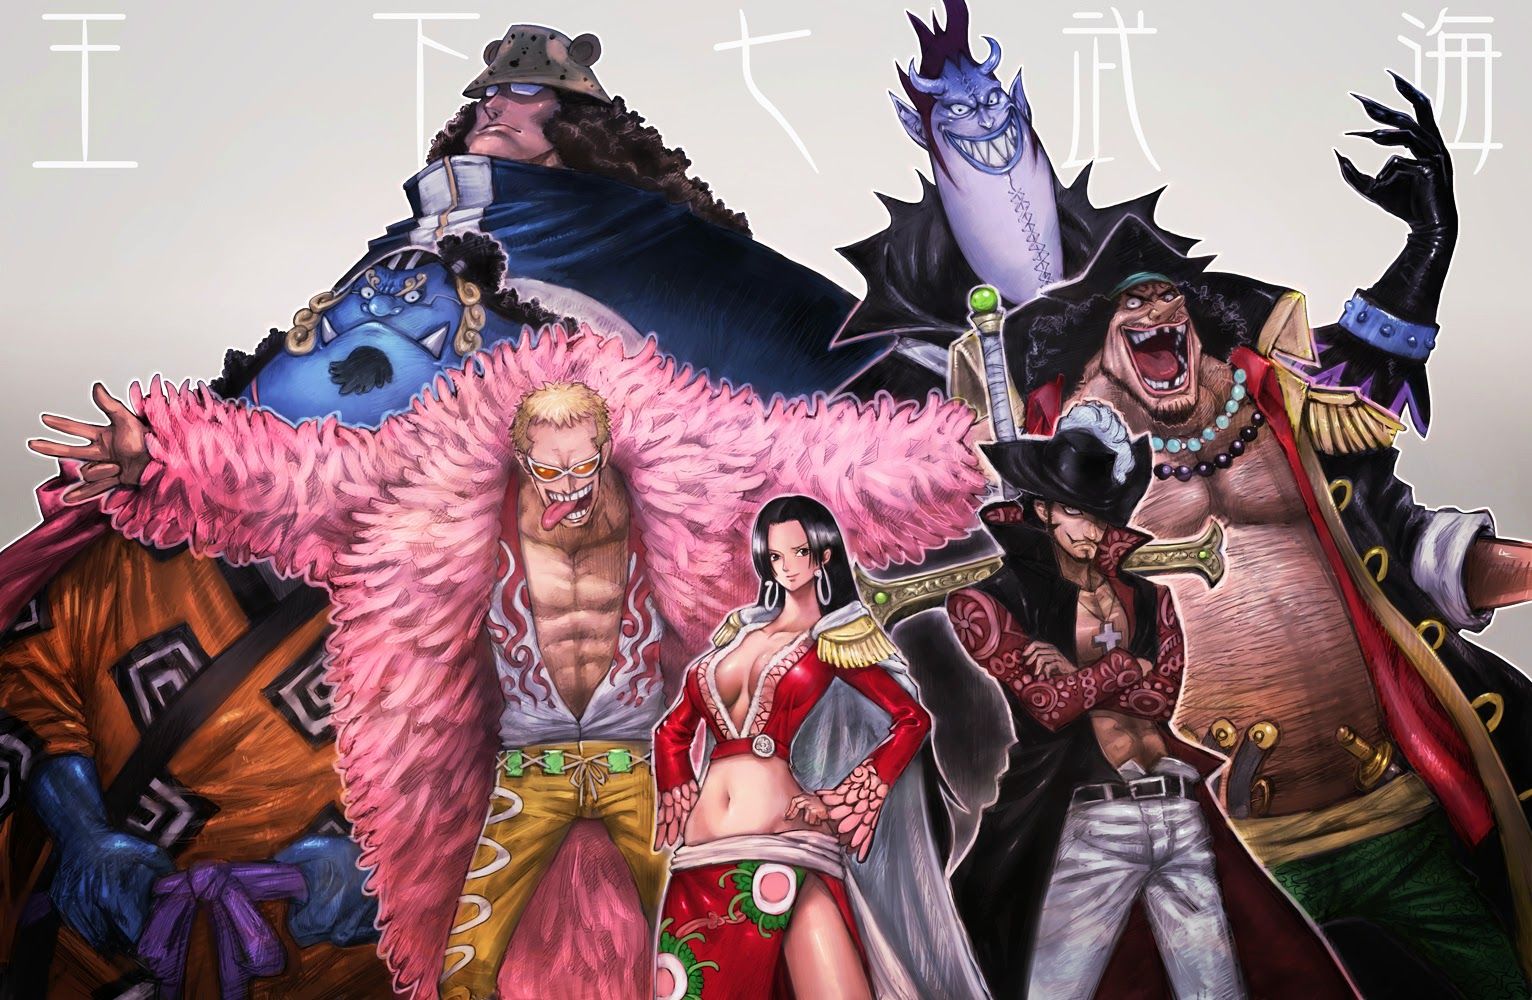 Seven Warlords Of The Sea Free Desktop Wallpaper in 2023  One piece  movies, Free desktop wallpaper, Things that bounce